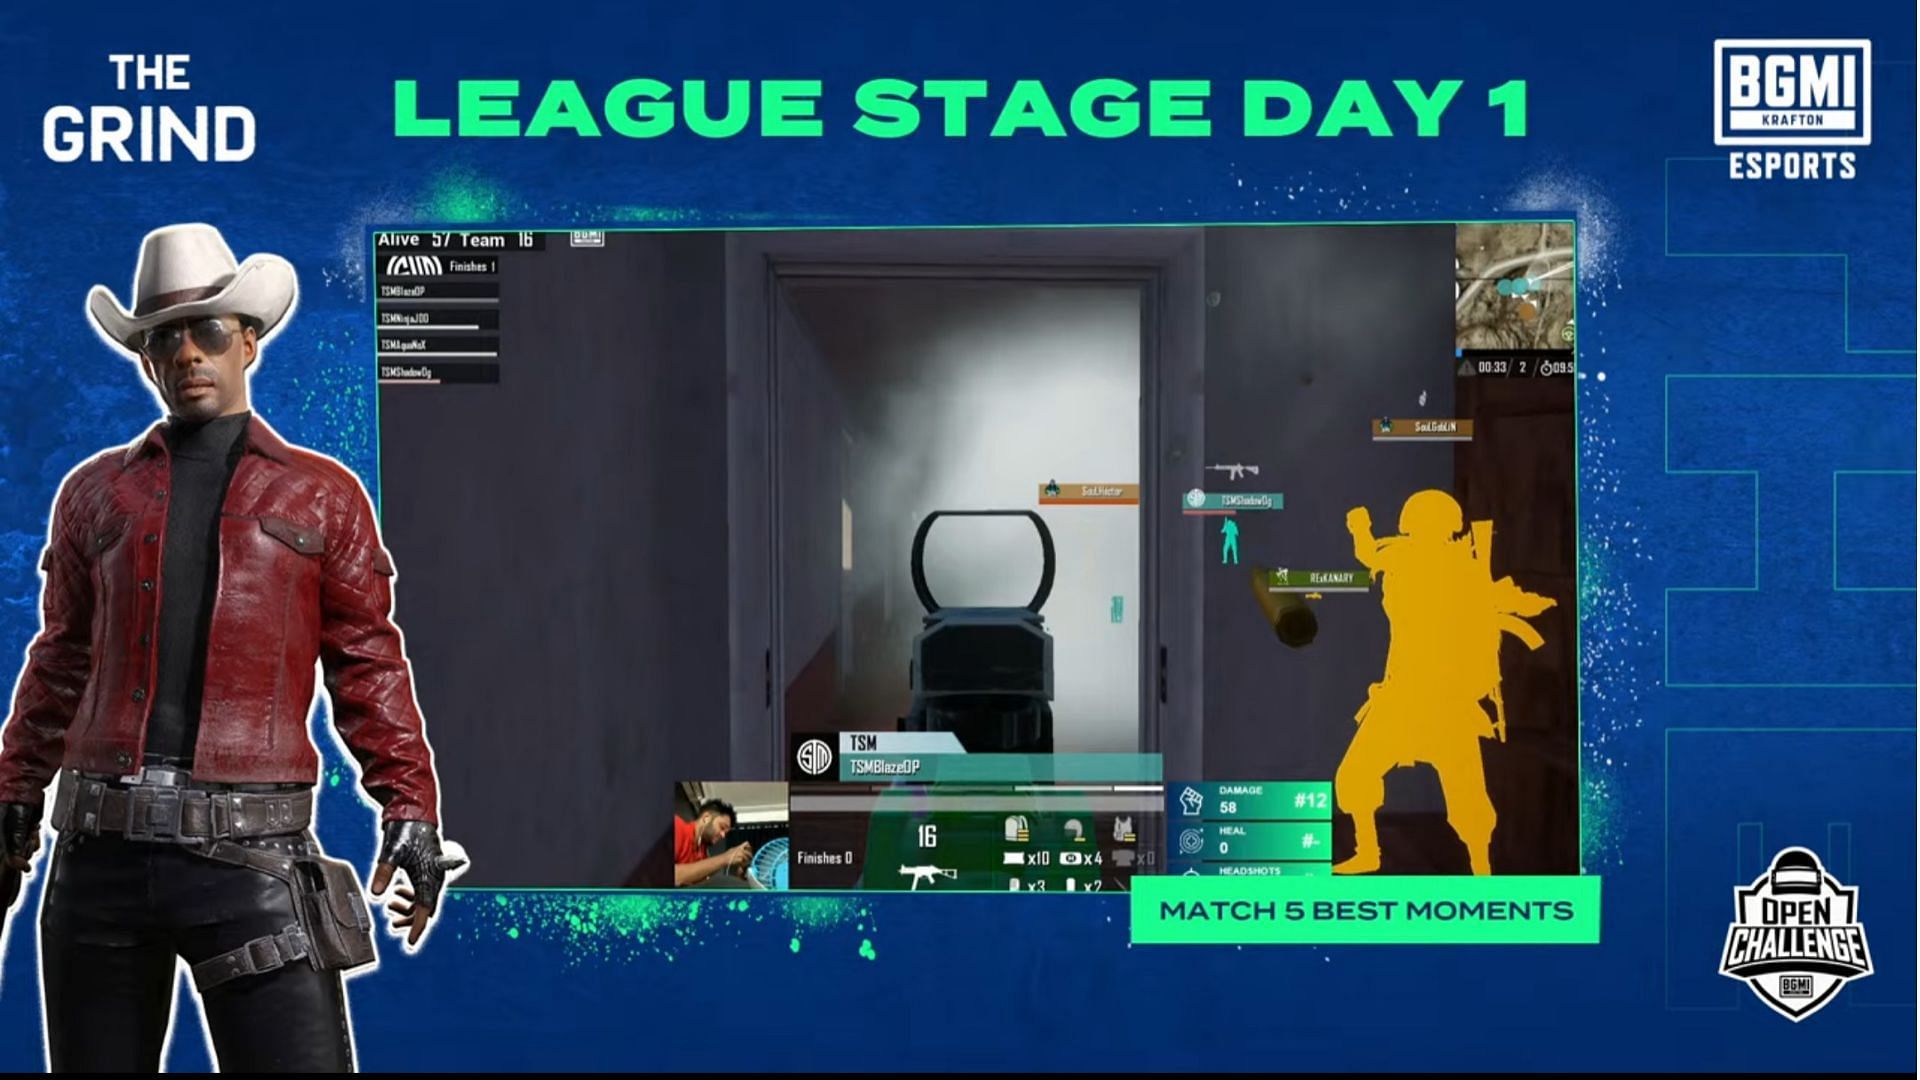 BMOC The Grind League Stage Day 1 (Image via BGMI)